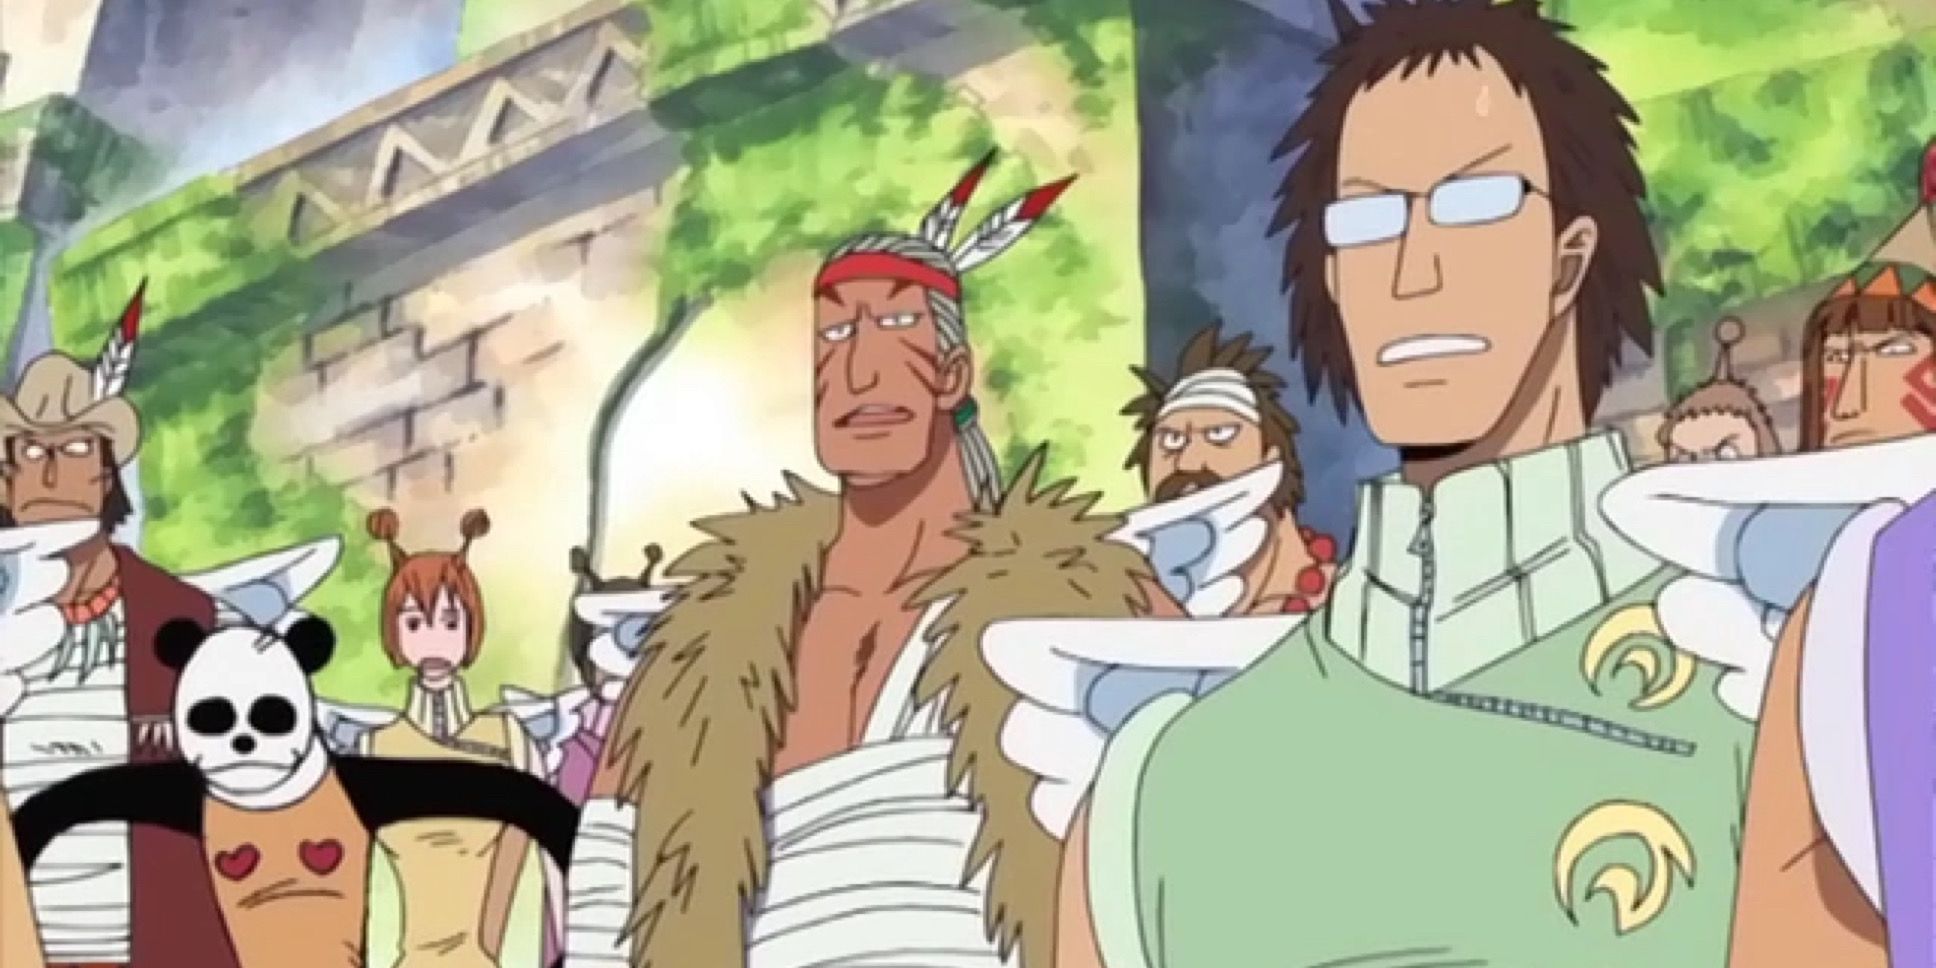 Pandaman Easter egg in One Piece anime